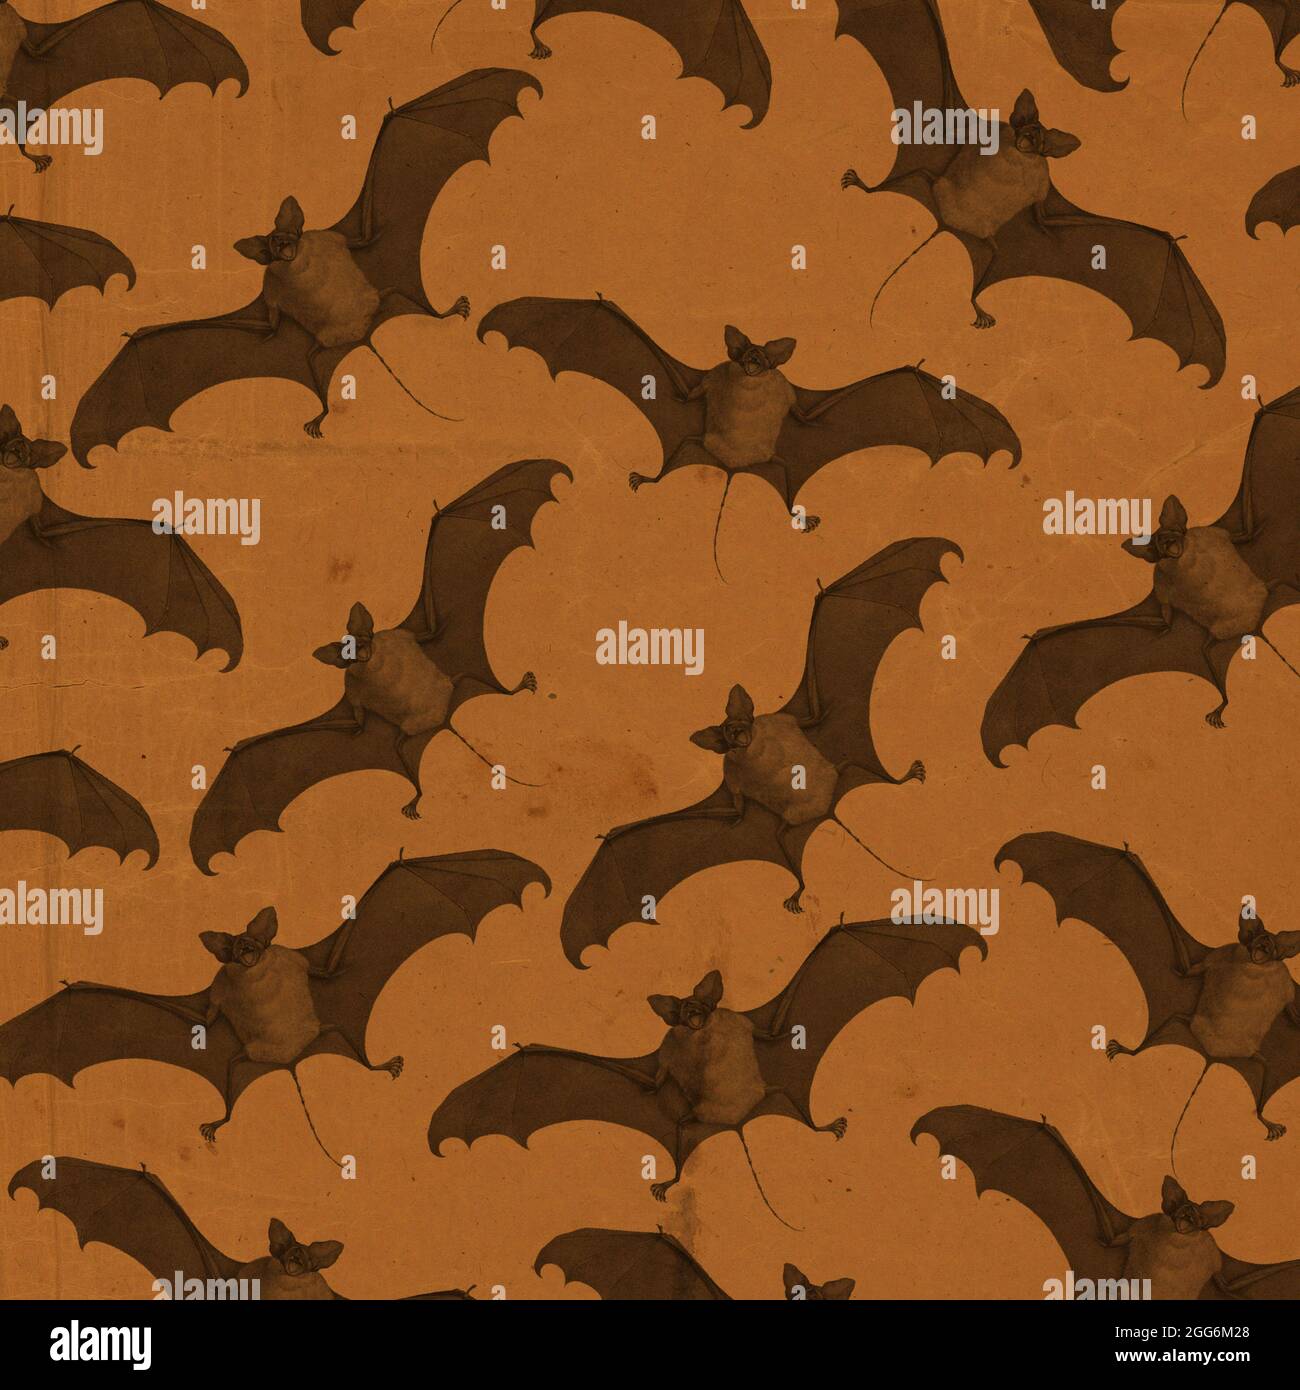 This is a vintage kraft style Halloween wallpaper or background featuring bats created using antique elements Stock Photo